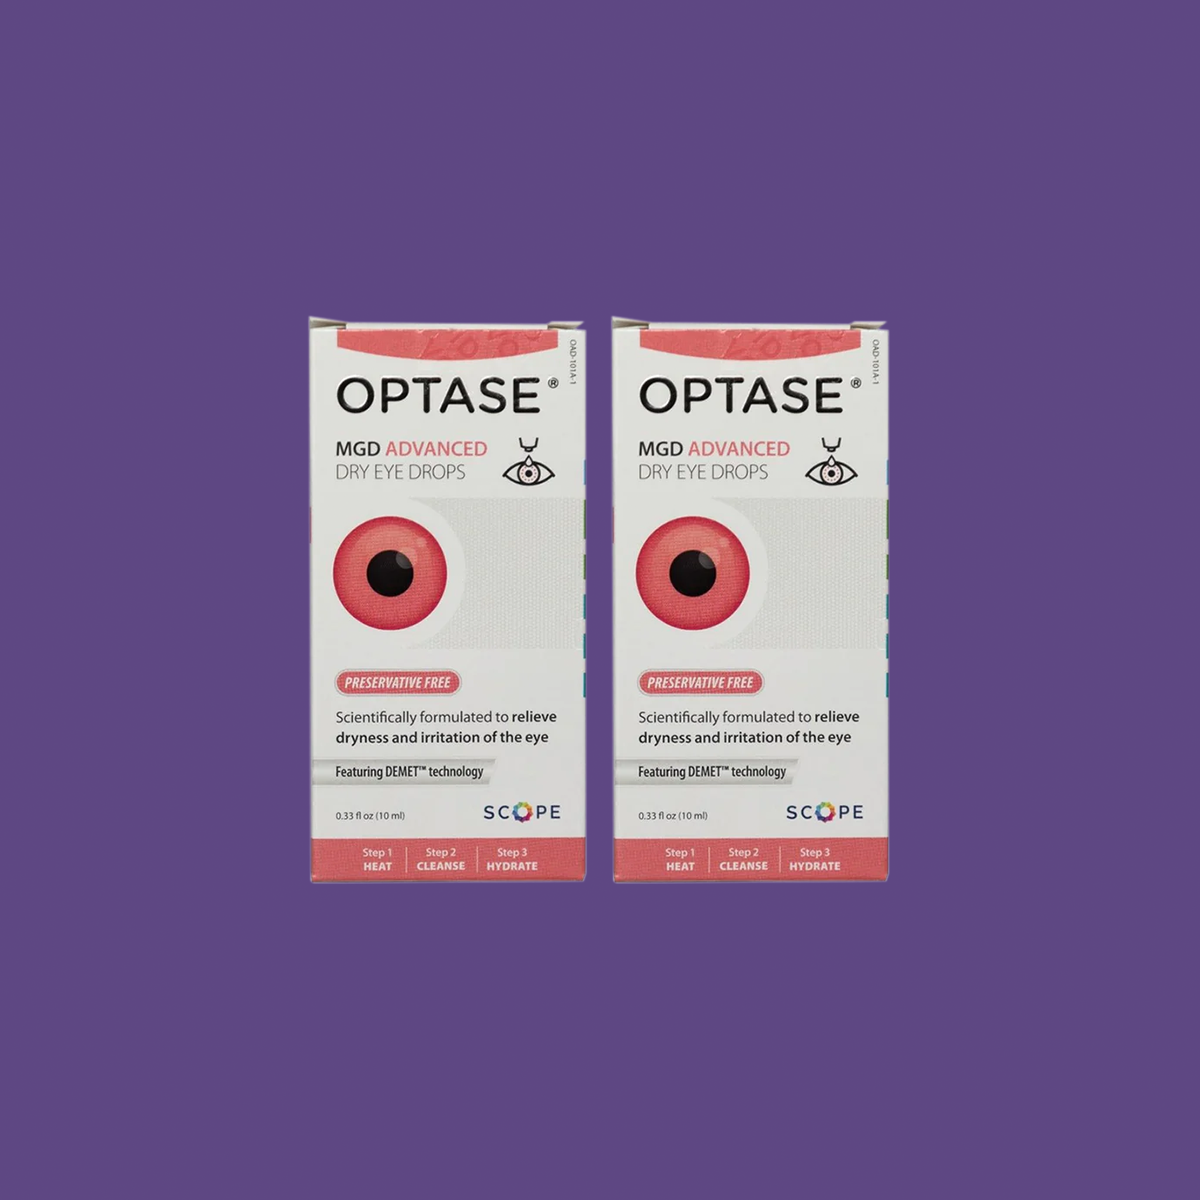 Optase MGD Advanced Dry Eye Drops Preservative-Free 3+ Month Supply (600 drops) 2-pack